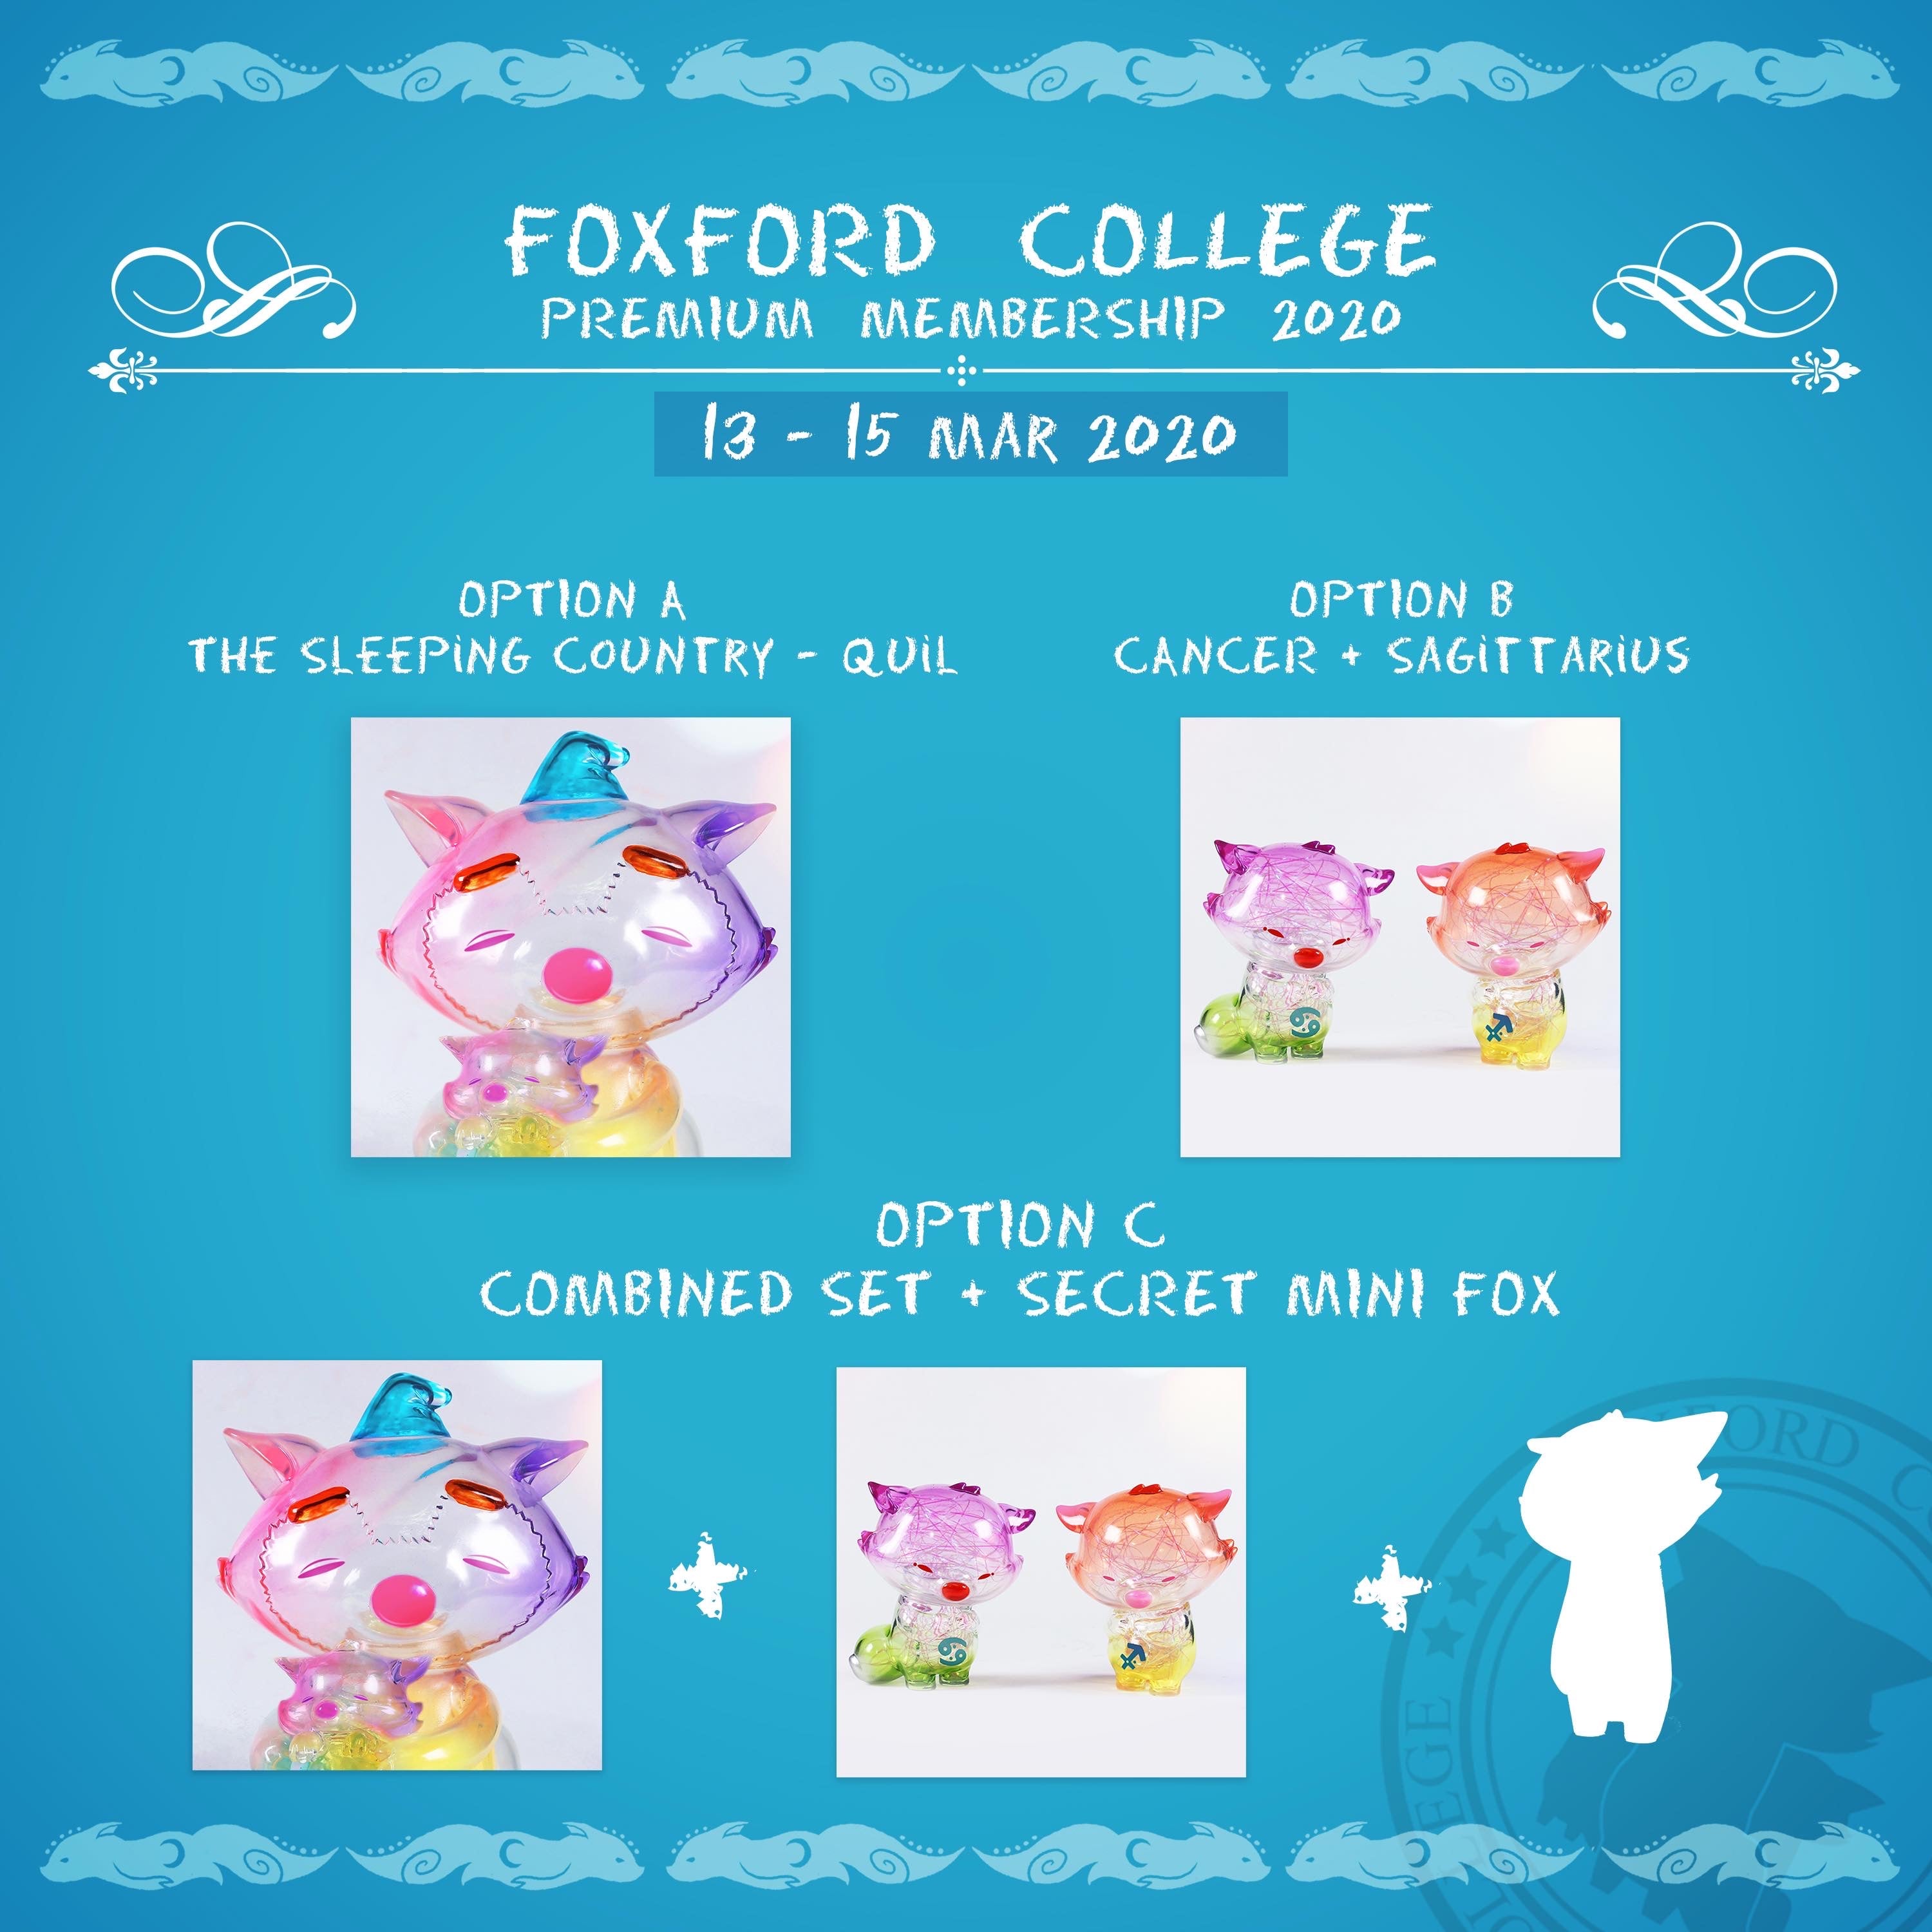 Plastic animal figurines including a cat, piggy bank, and cartoon character for Ok Luna's Foxford College Premium Membership 2020.